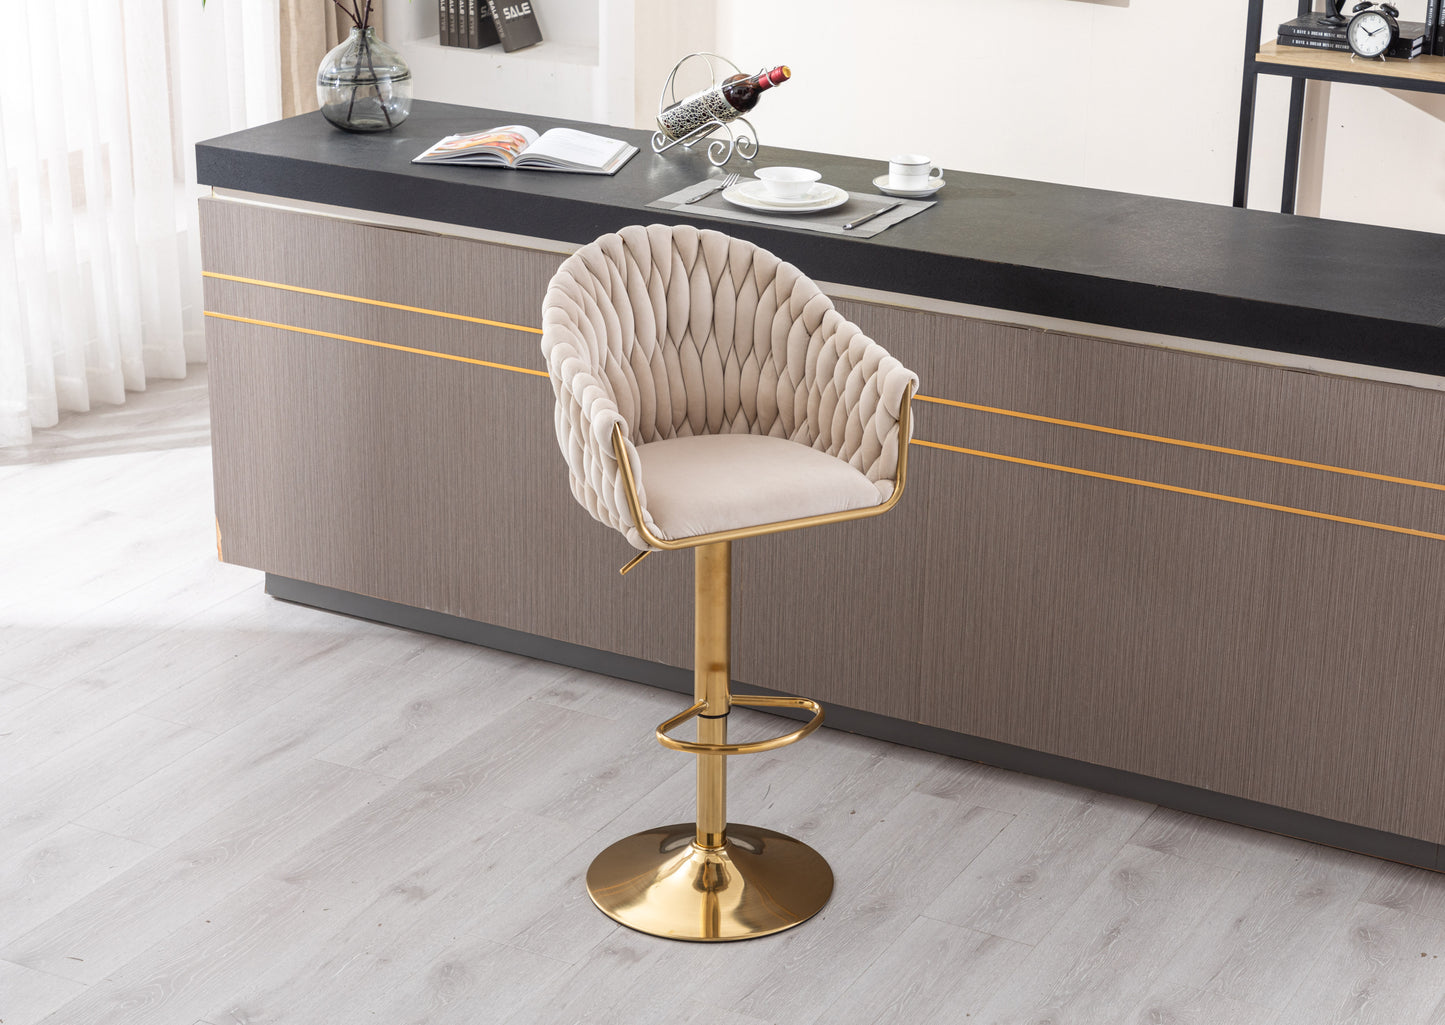 COOLMORE Vintage Bar Stools with Back and Footrest Counter Height Dining Chairs - Enova Luxe Home Store